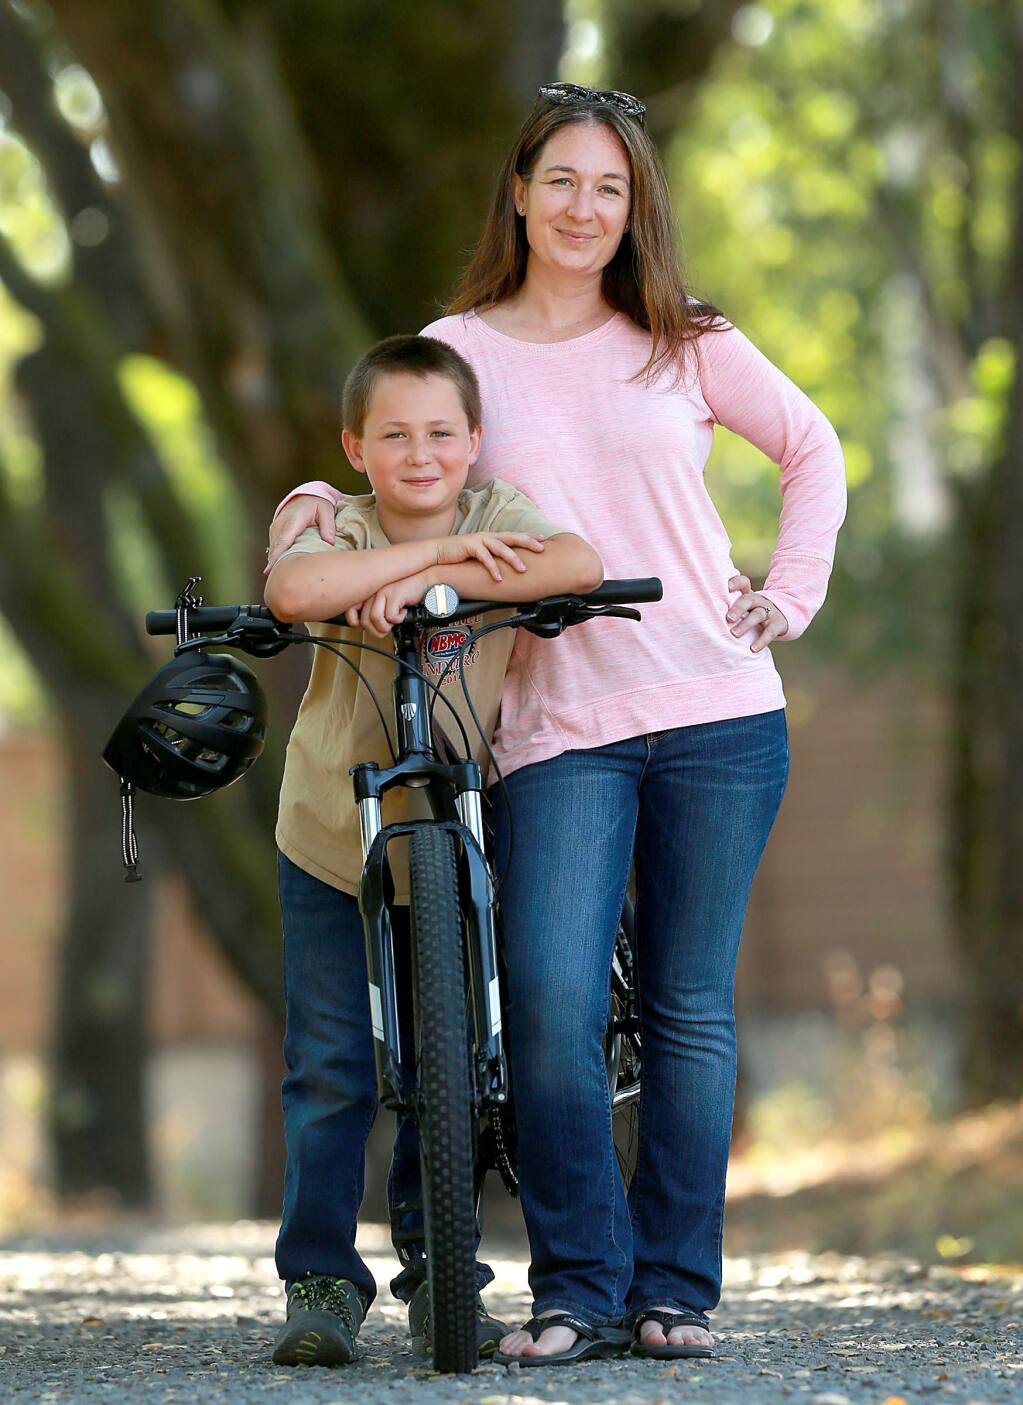 Will Seder, 9, saved his money and split the cost of a new bike with his mother, Tiffany. Two months later the bike stolen out of the garage of their west Santa Rosa home. (JOHN BURGESS/ PD)